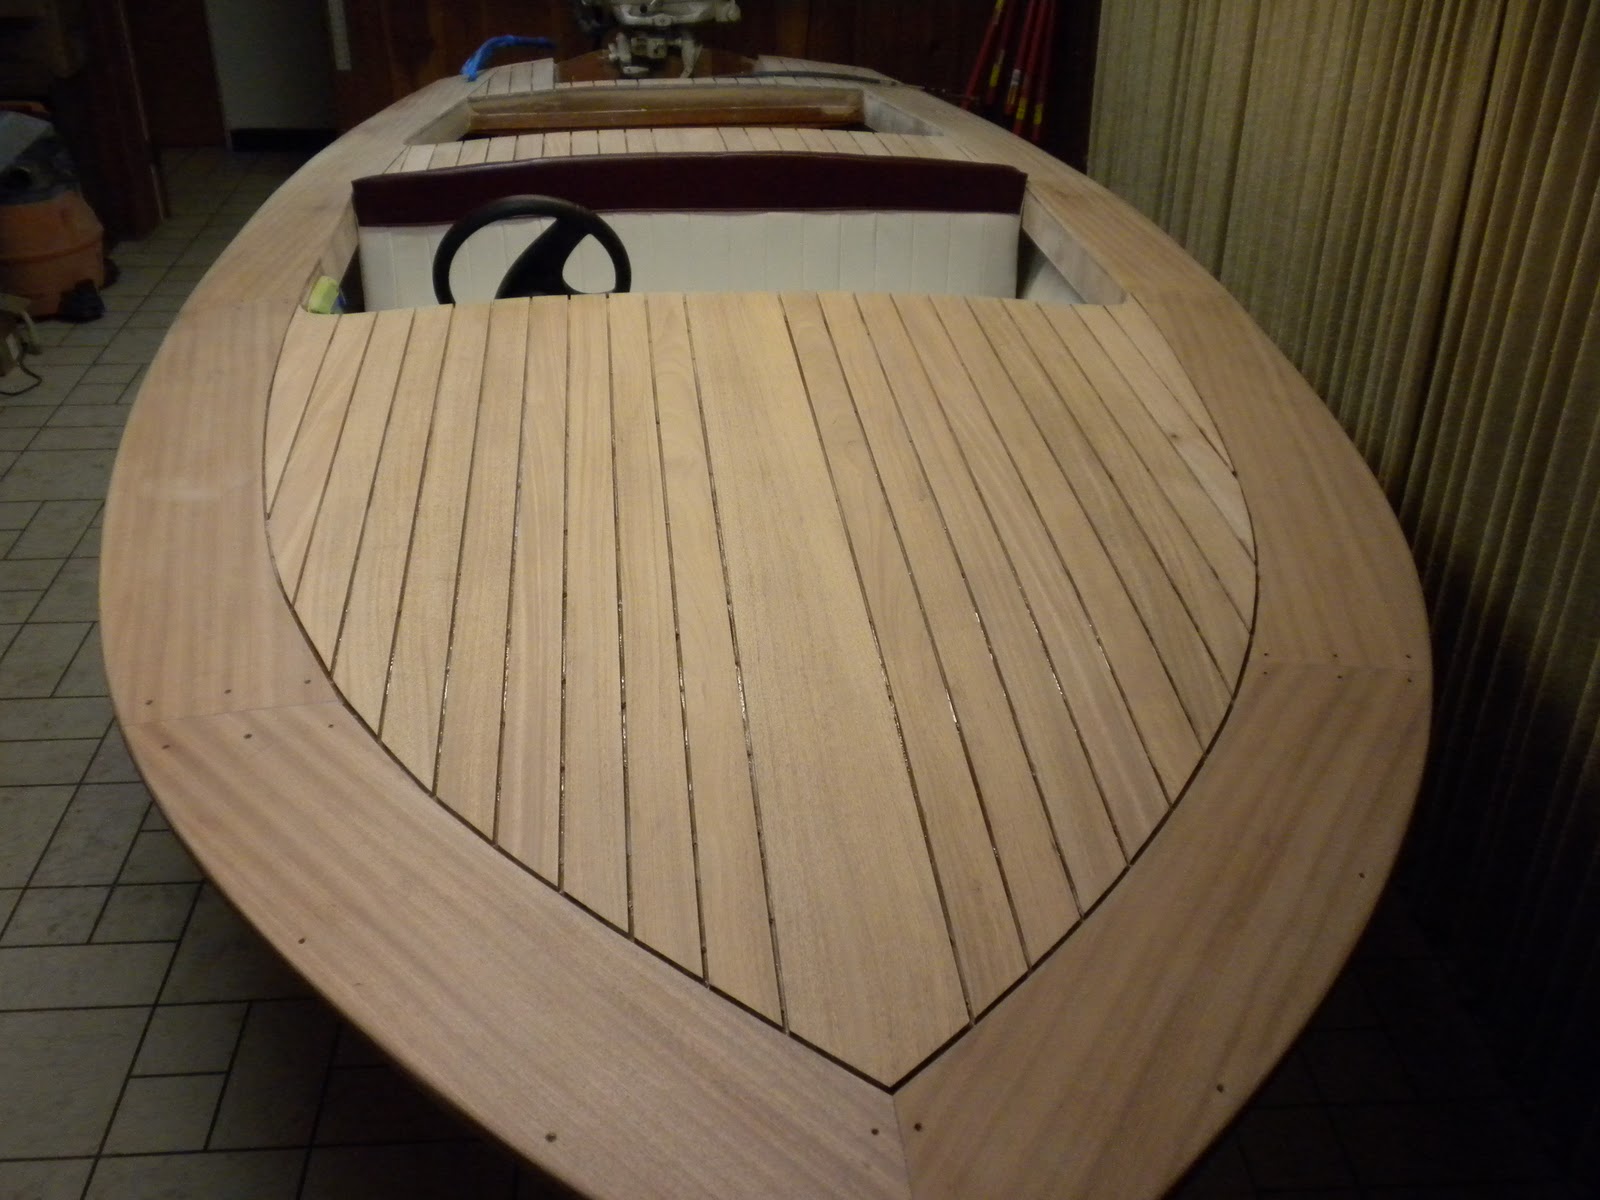 Ted's Wood Boat: The Deck is now glued down